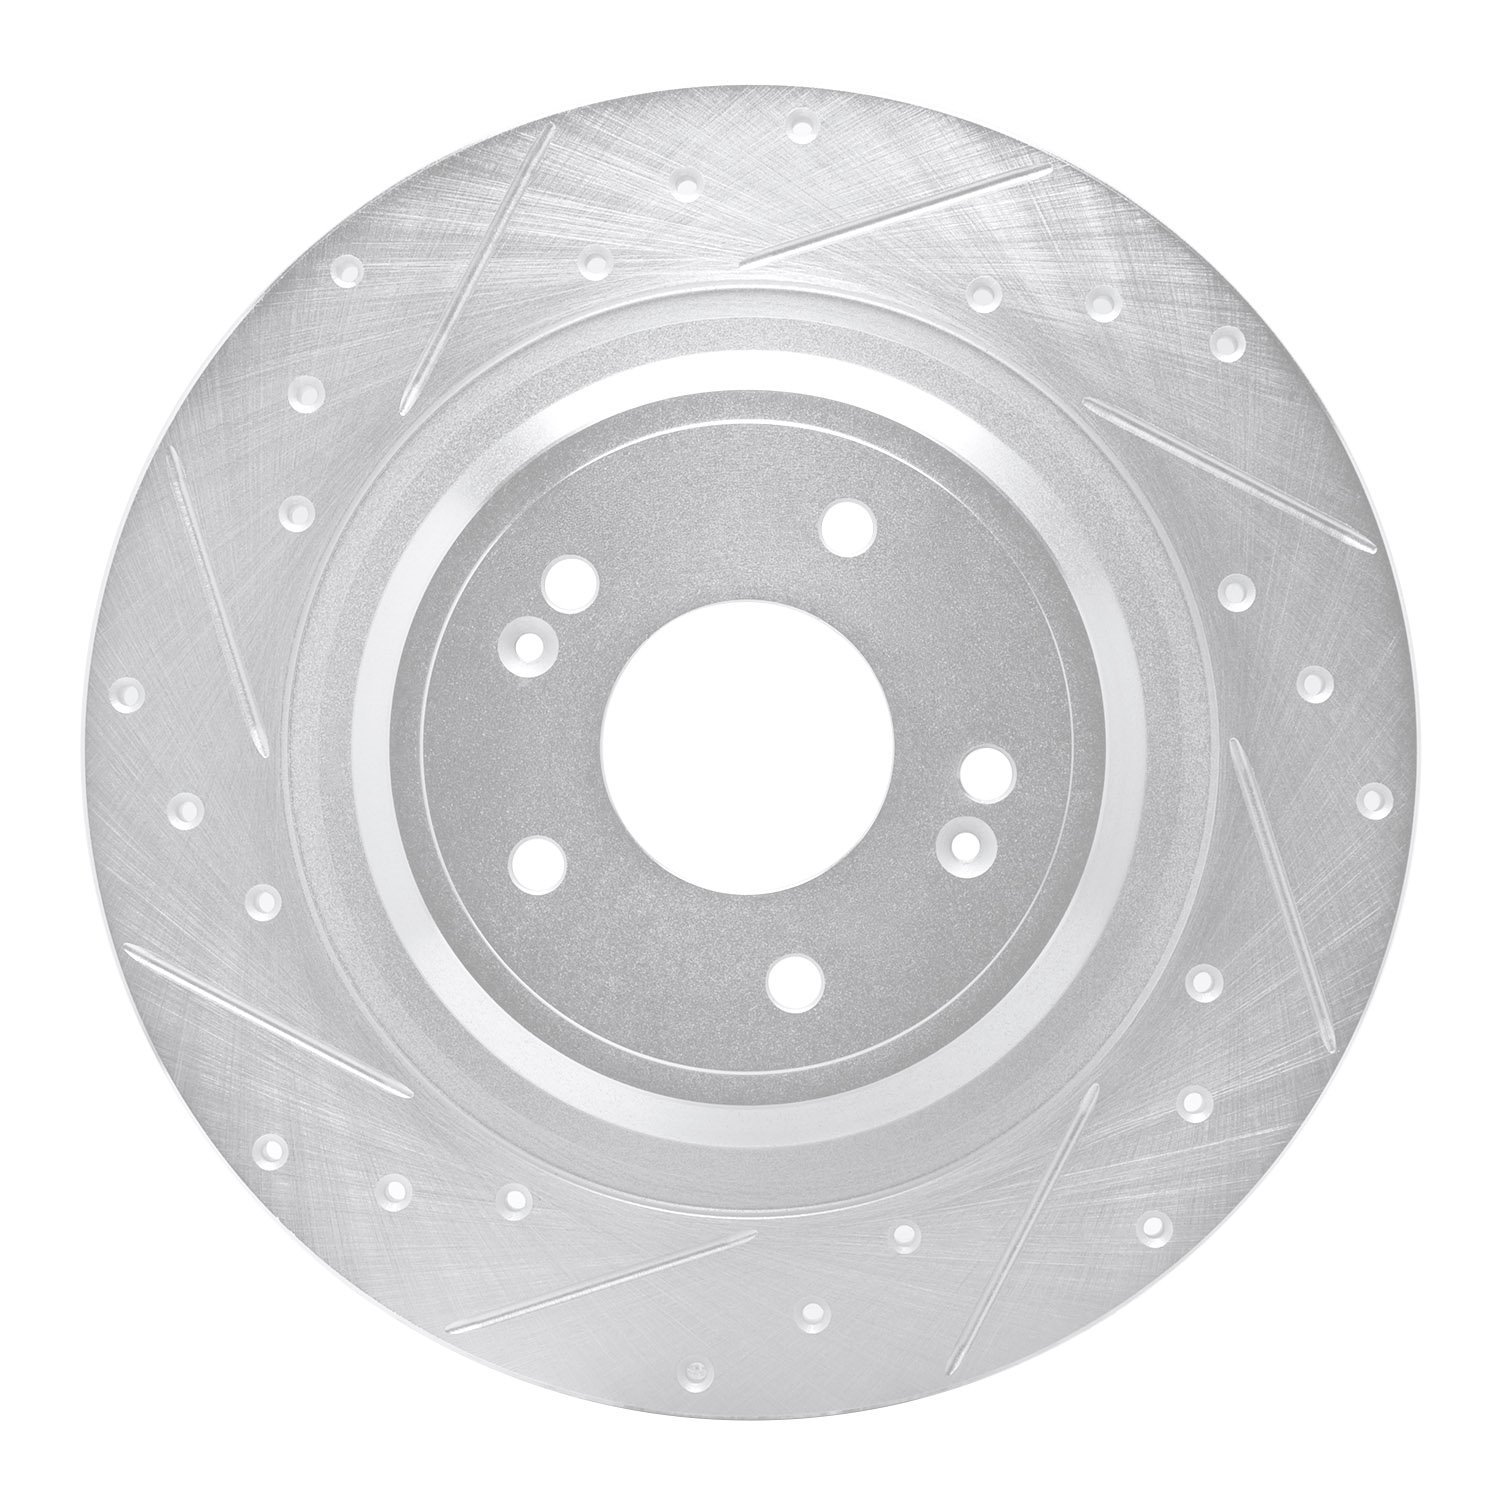 631-21054L Drilled/Slotted Brake Rotor [Silver], Fits Select Kia/Hyundai/Genesis, Position: Rear Left